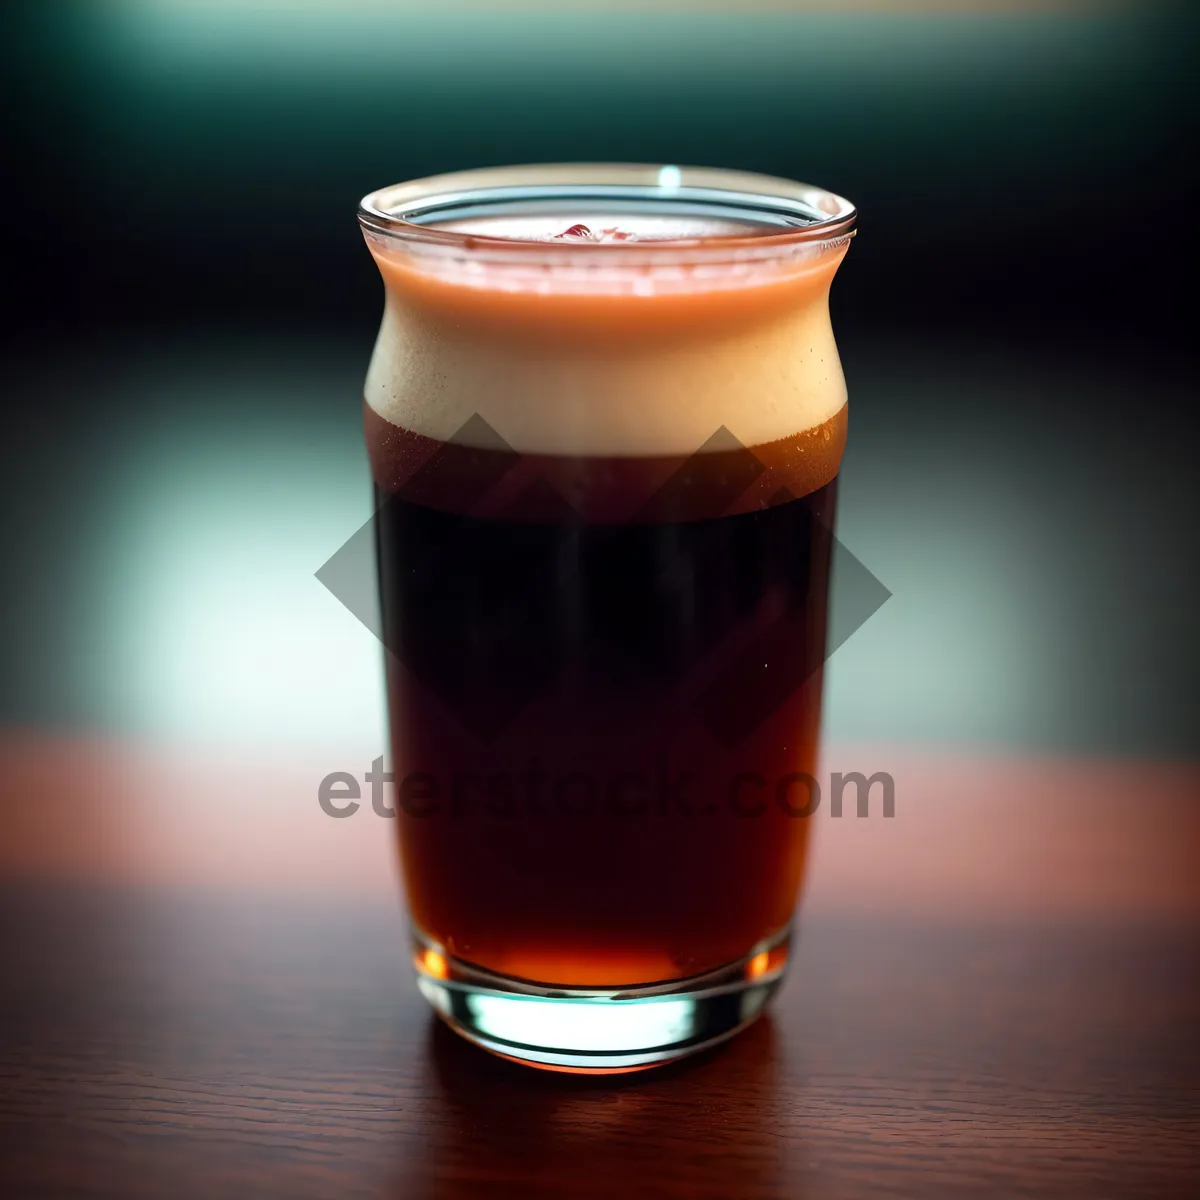 Picture of Frothy Lager in Glass Mug at Bar